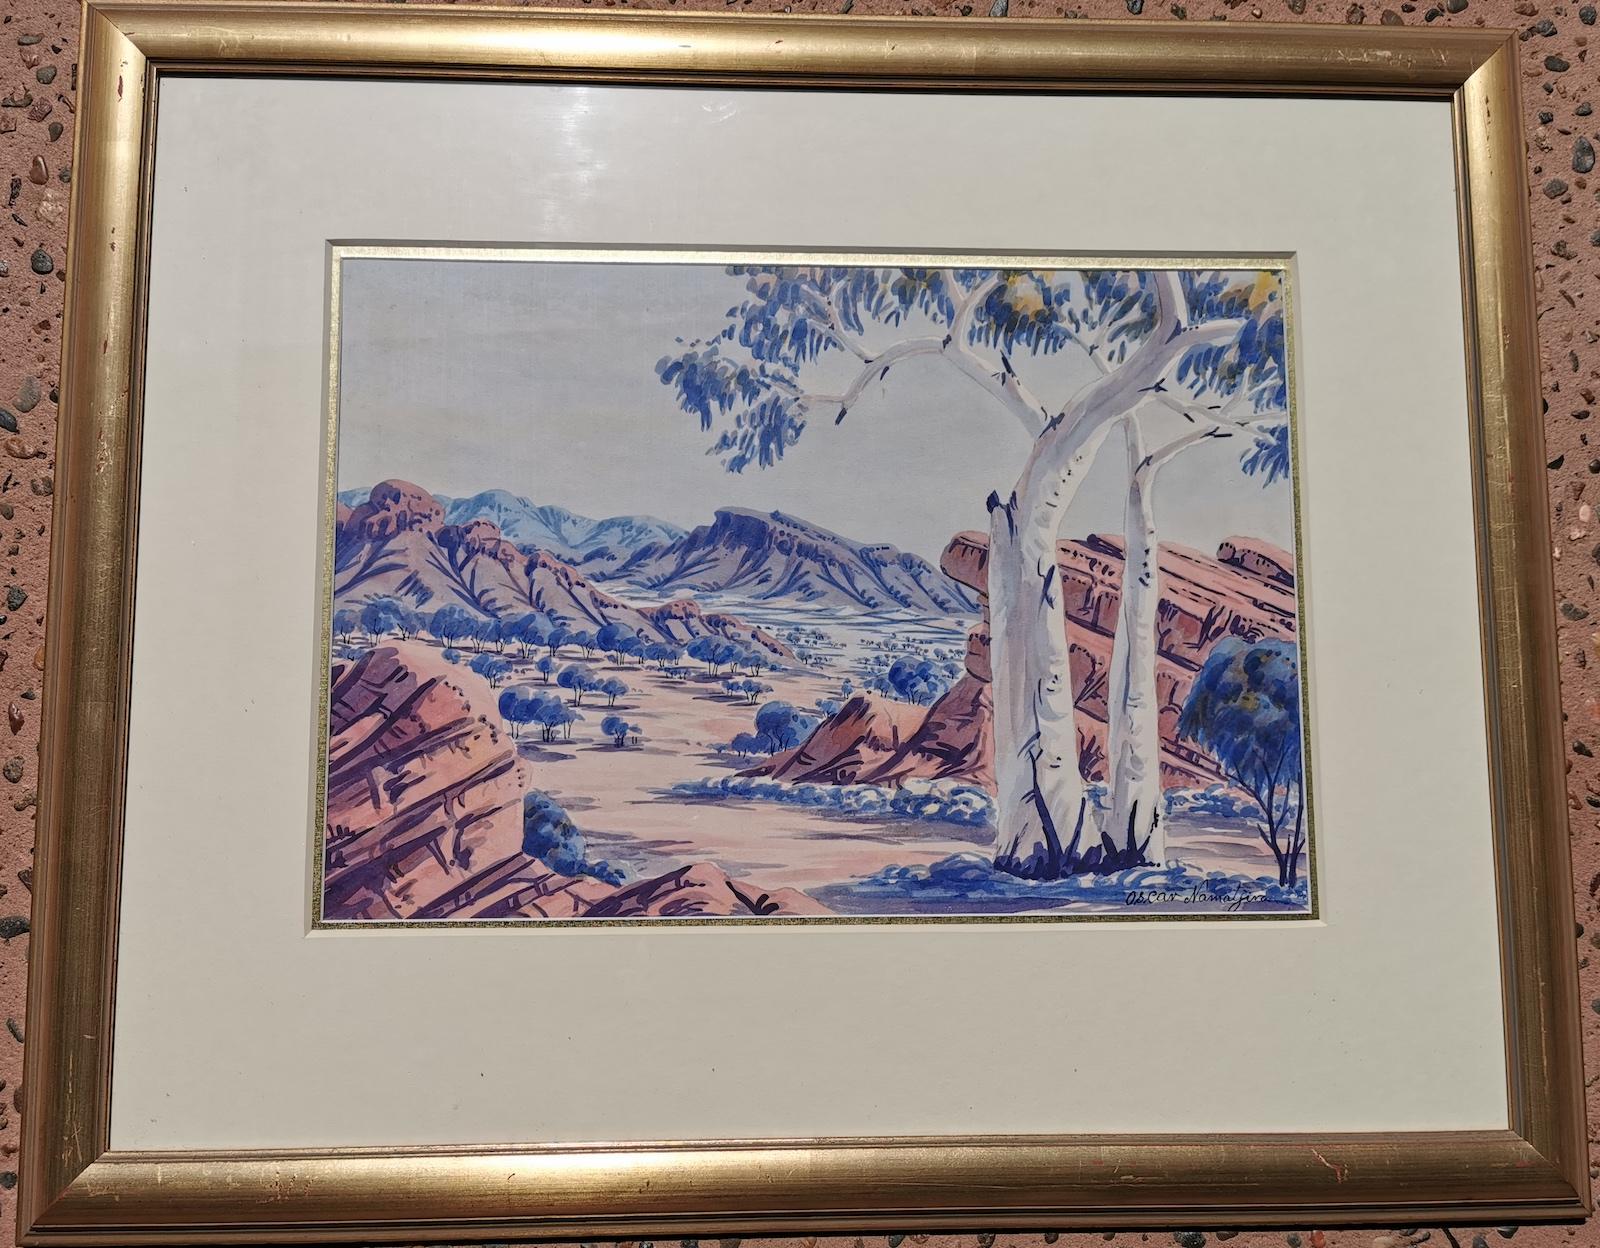 Oscar Namatjira (1922-1991), Central Australian Landscape,
signed bottom right,
image 51 x 36cm, frame 82 x 67cm
Oscar Namatjira was born in 1922. He attended Mission school before joining the Army Labour Gang in 1942. Three years later he